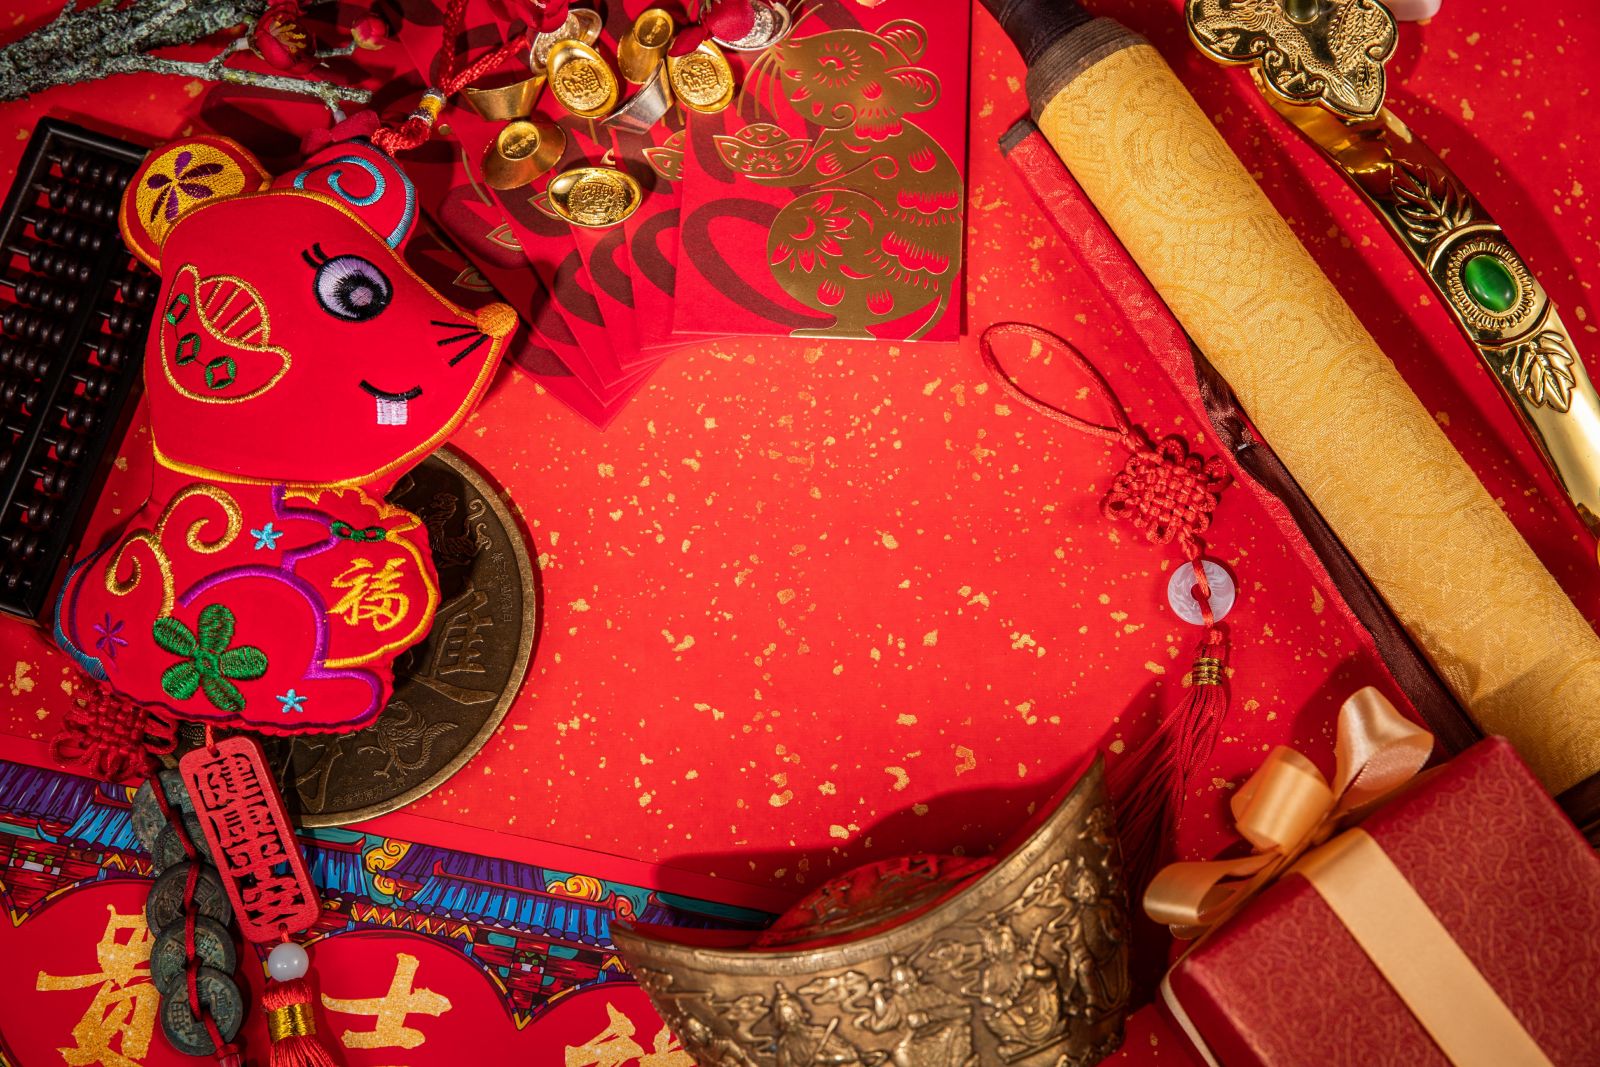 How do Chinese People Decorate for Chinese New Year?-The Top 8 Decorations